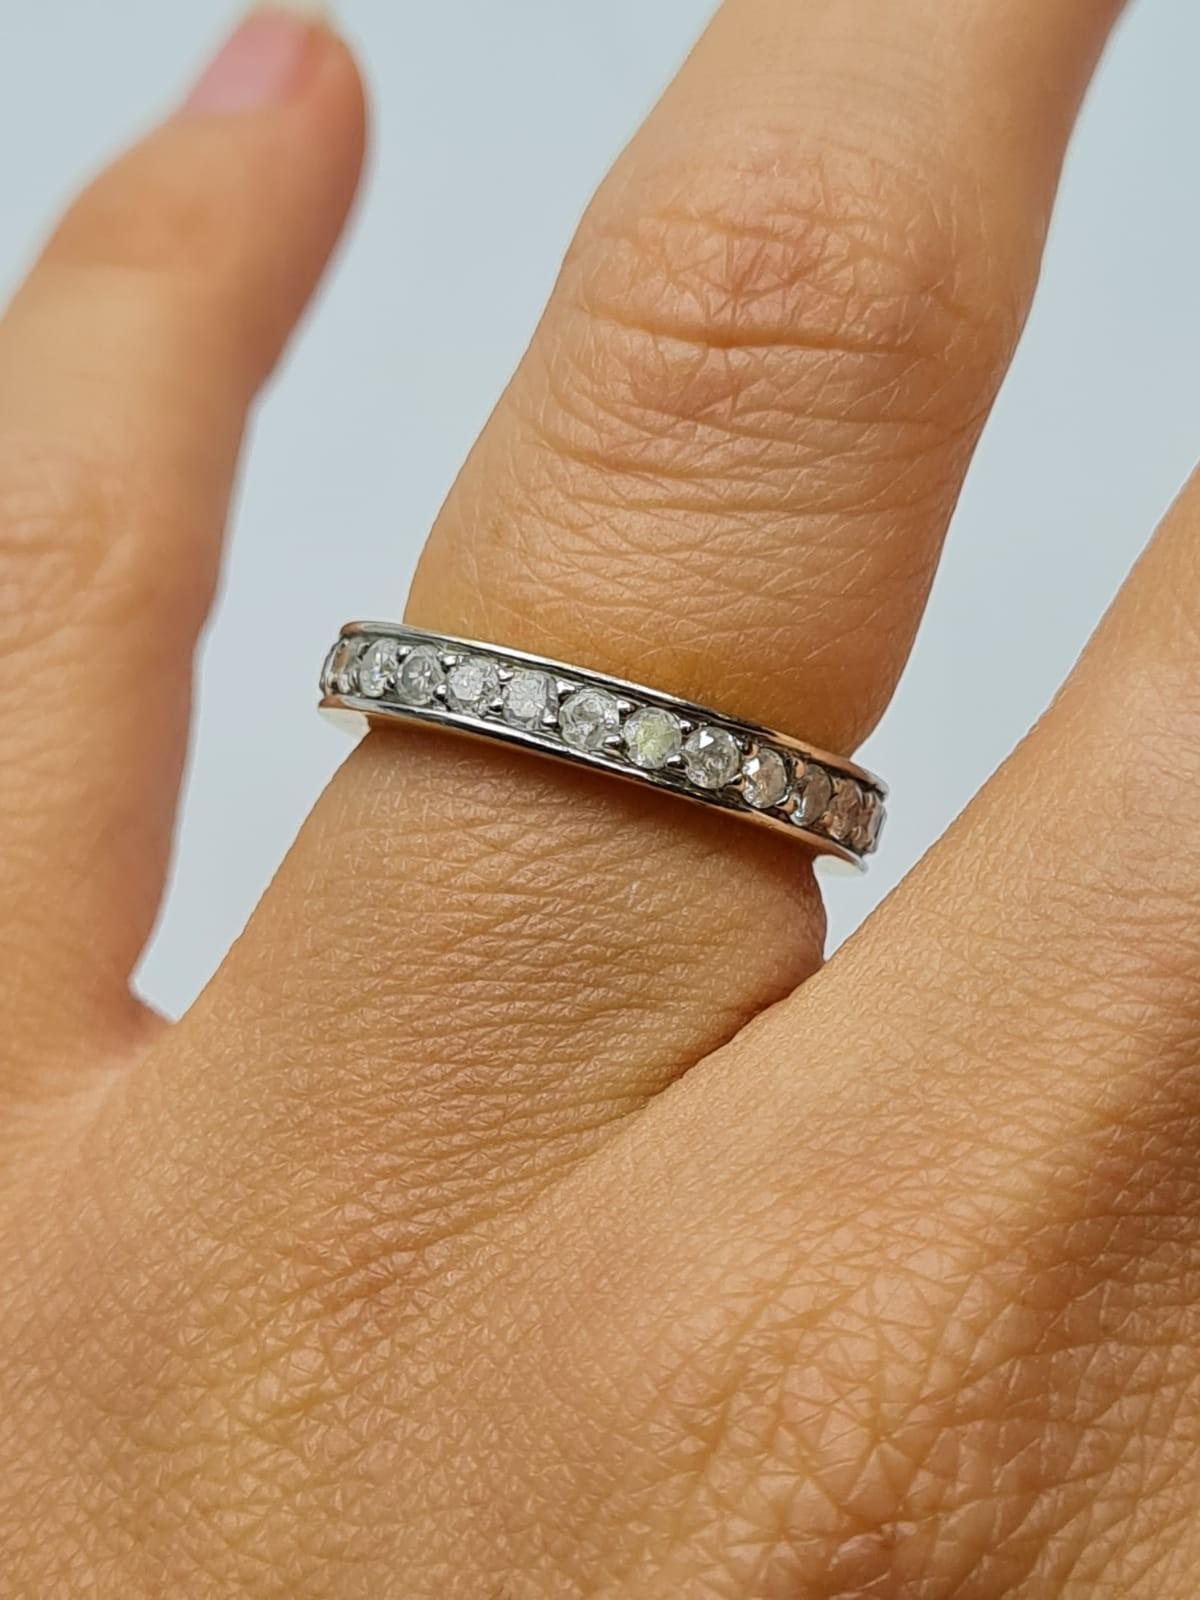 9ct Gold Full Eternity Ring With Small Diamonds 2g Size K - Image 4 of 4